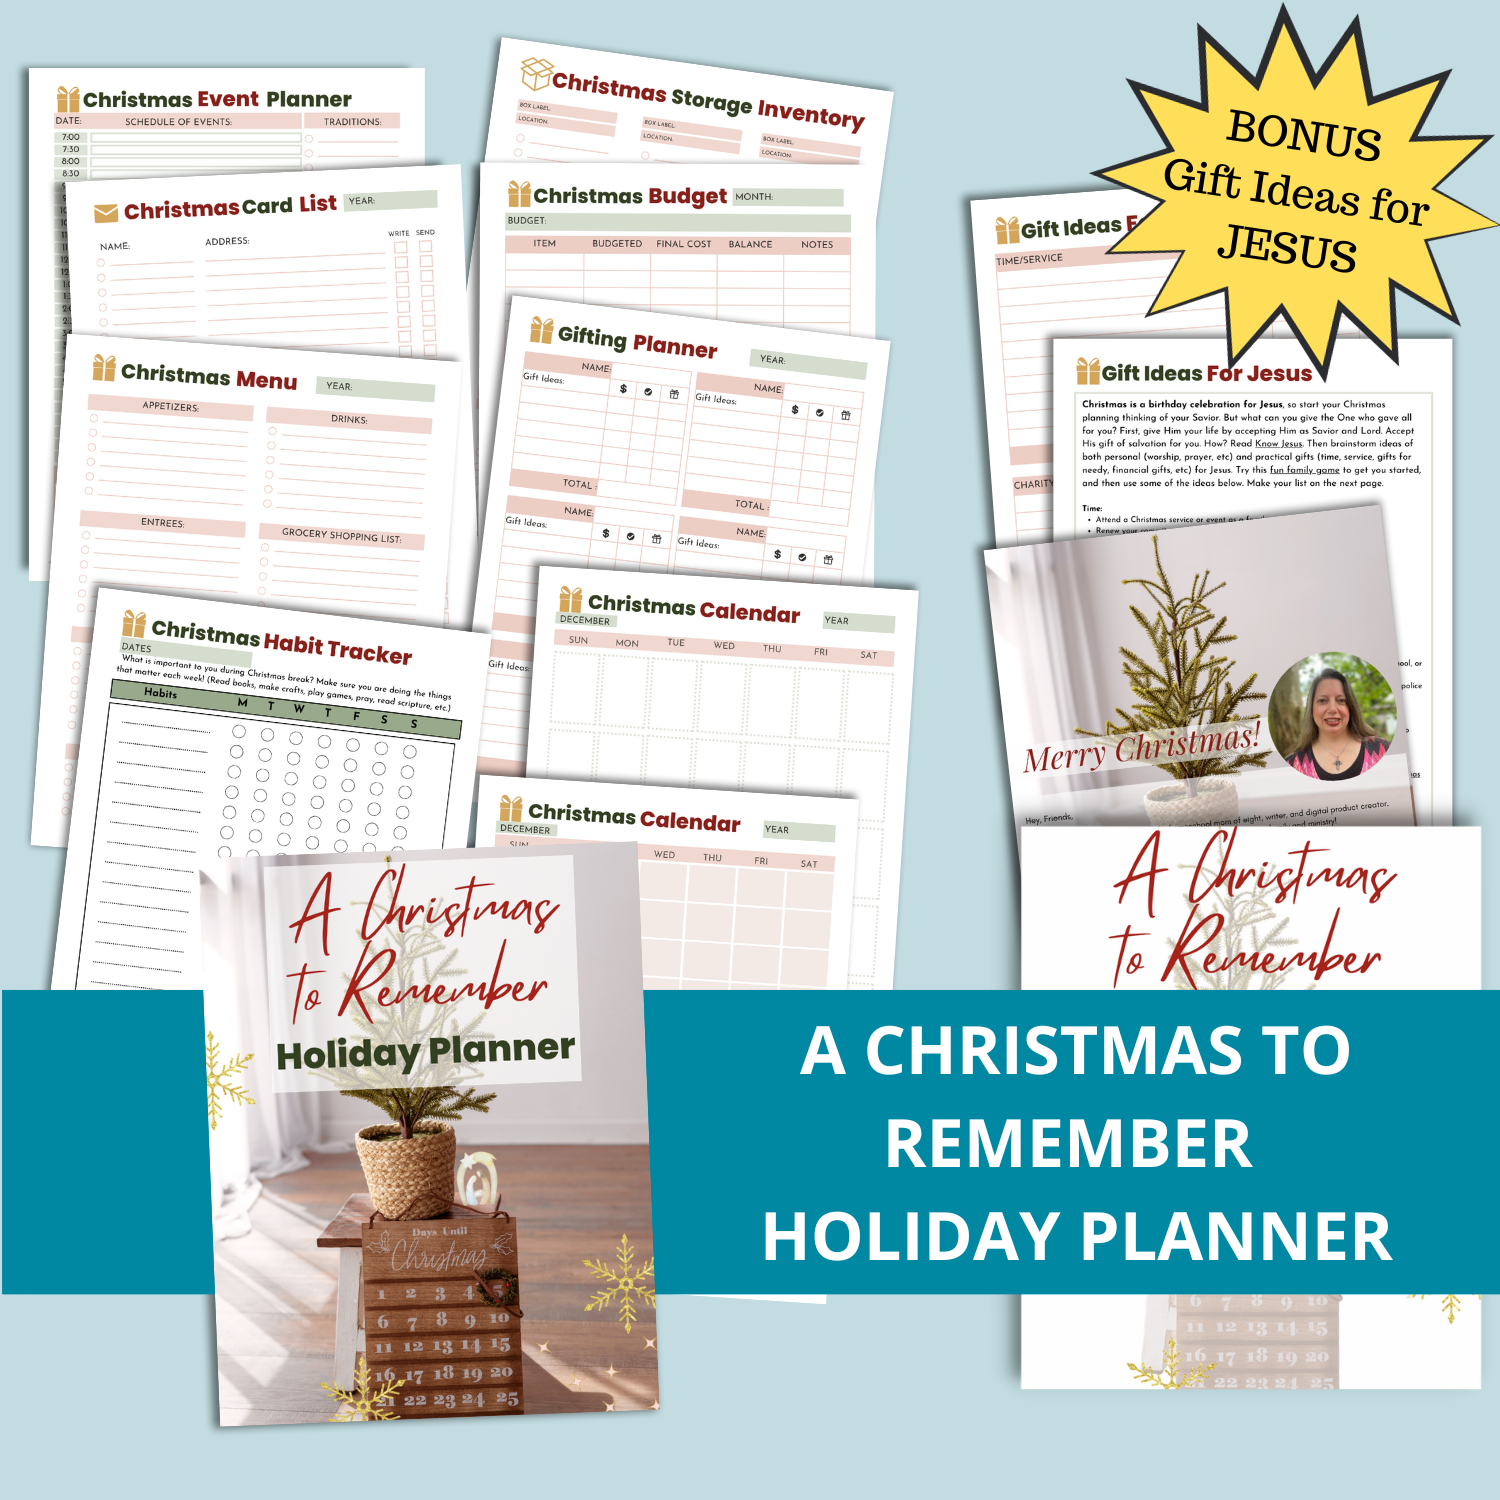 A Christmas to remember Holiday Planner with gift ideas for Jesus